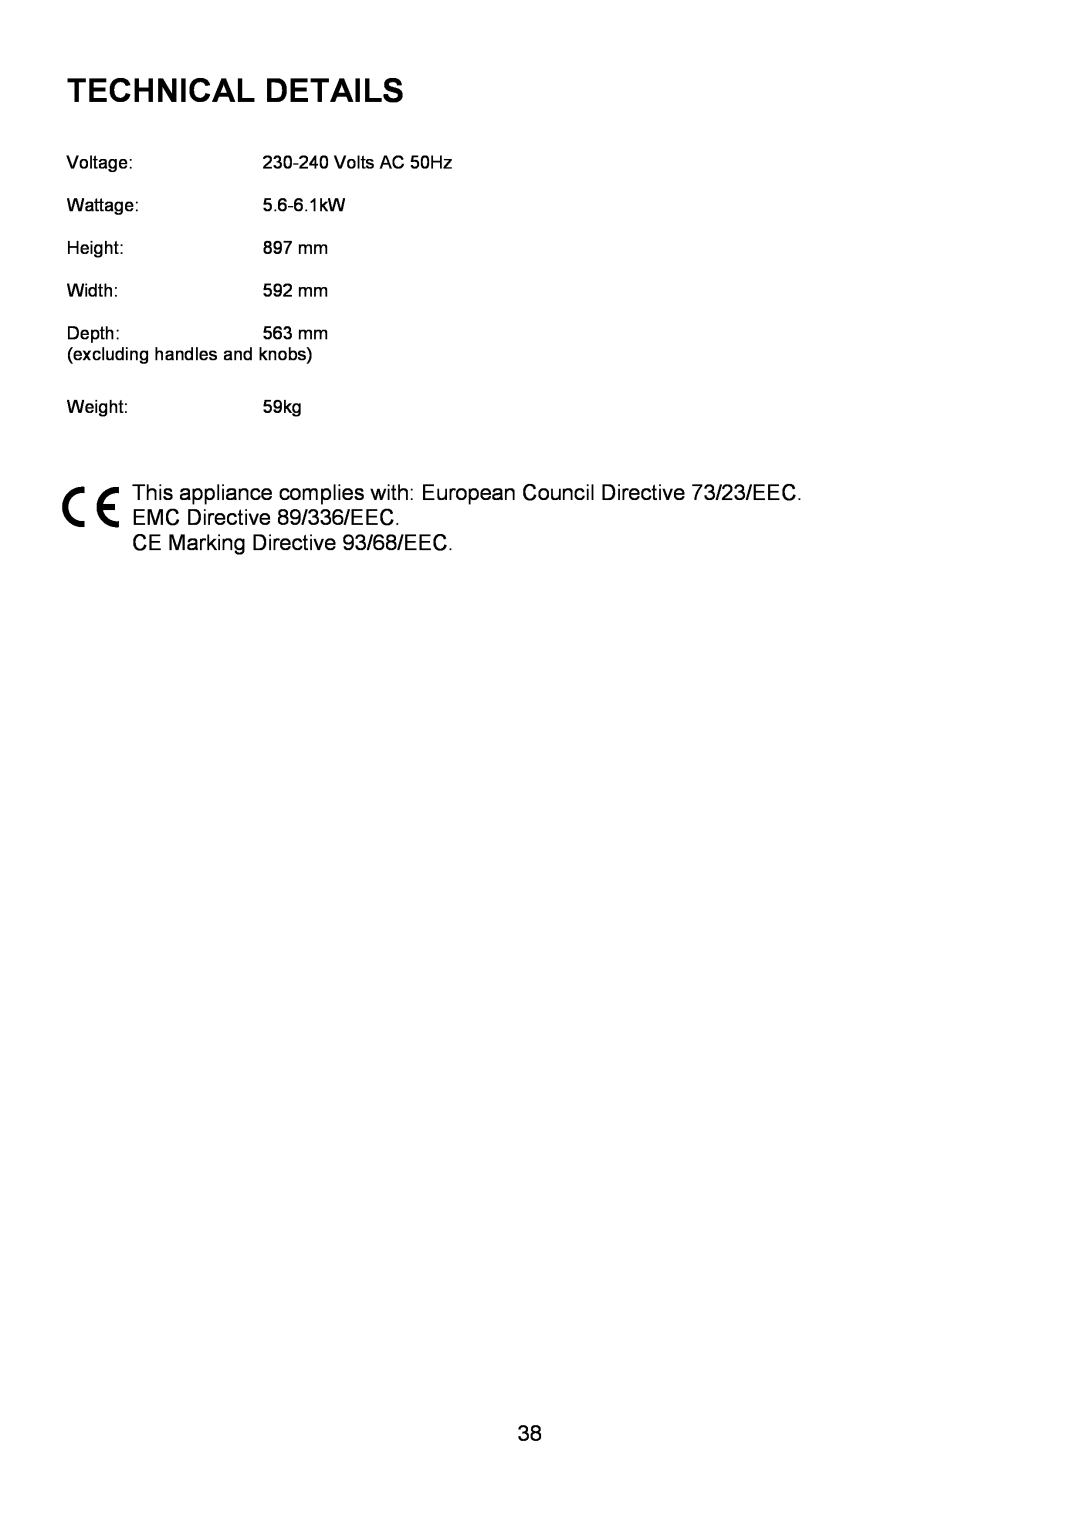 Electrolux D4101-4 operating instructions Technical Details, CE Marking Directive 93/68/EEC 